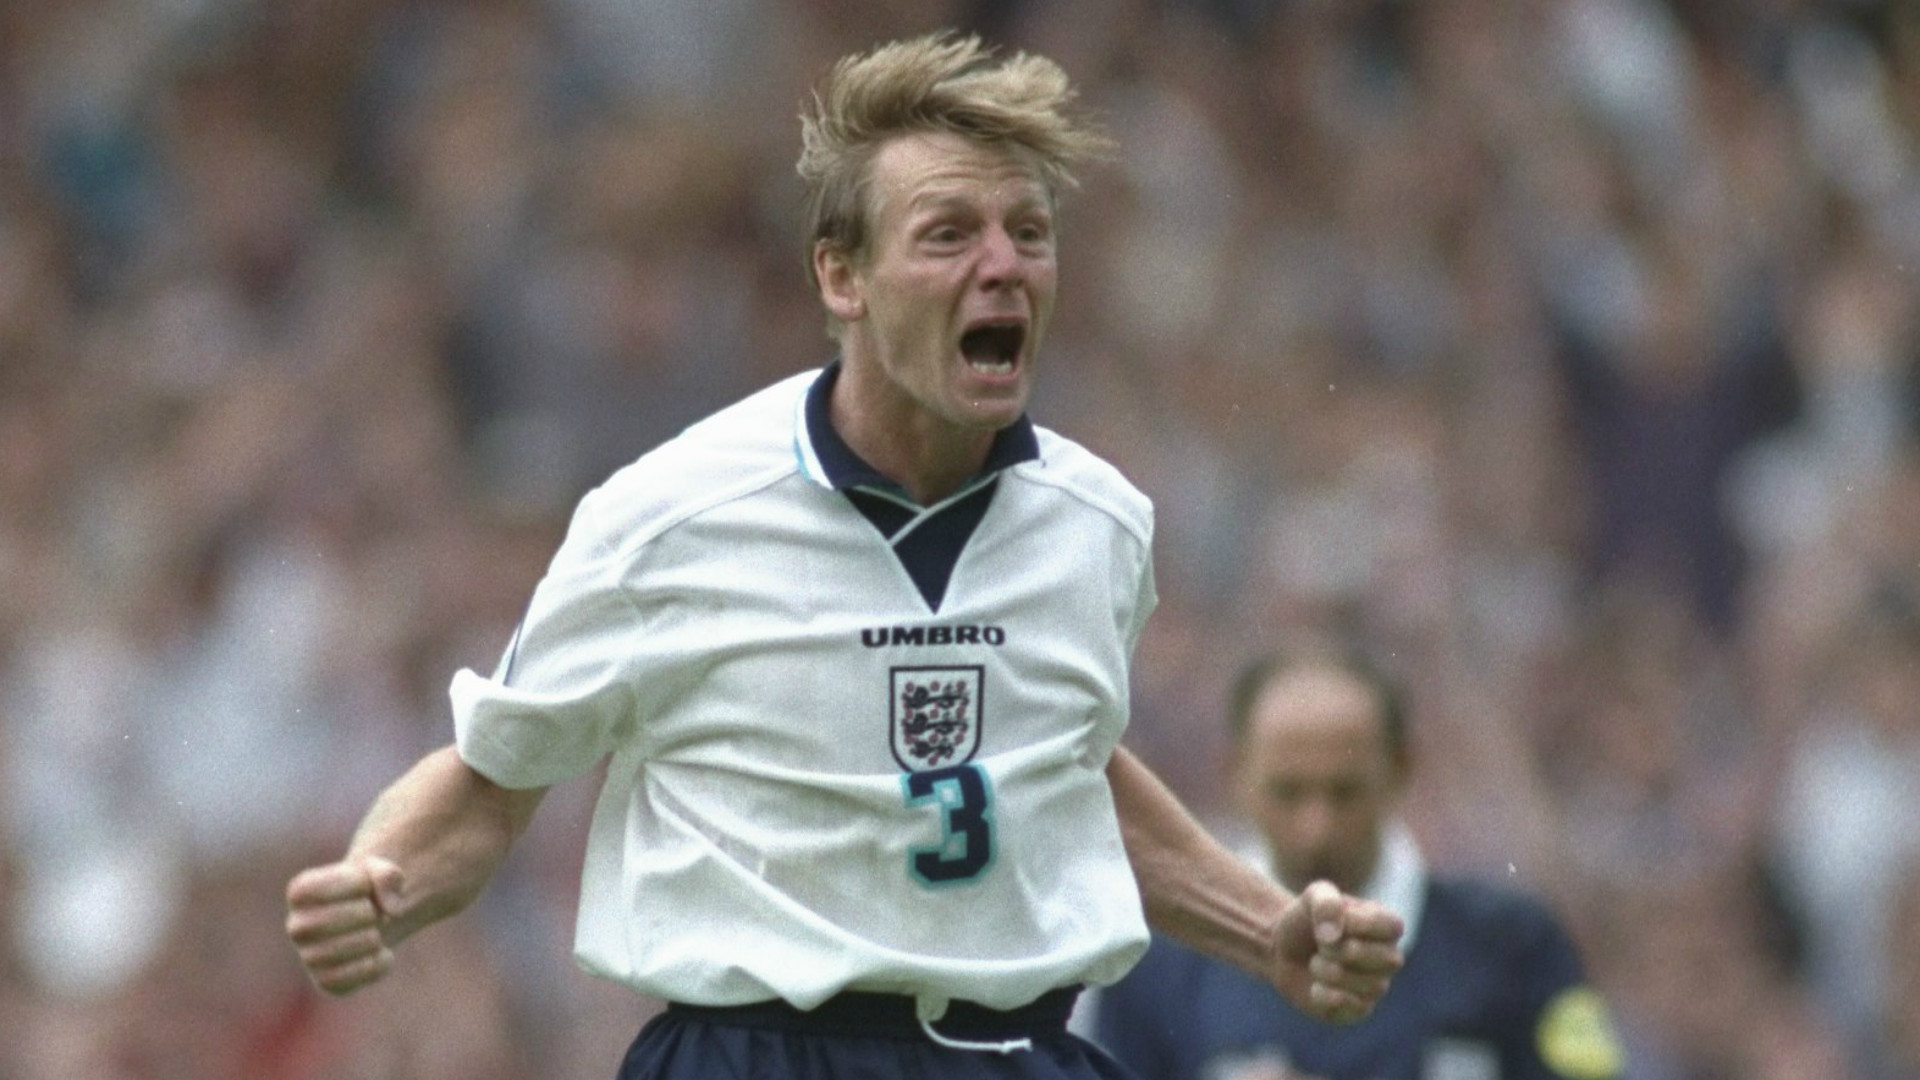 Three Lions: England Euro 96 song lyrics, meaning & 'Football's Coming Home' anthem